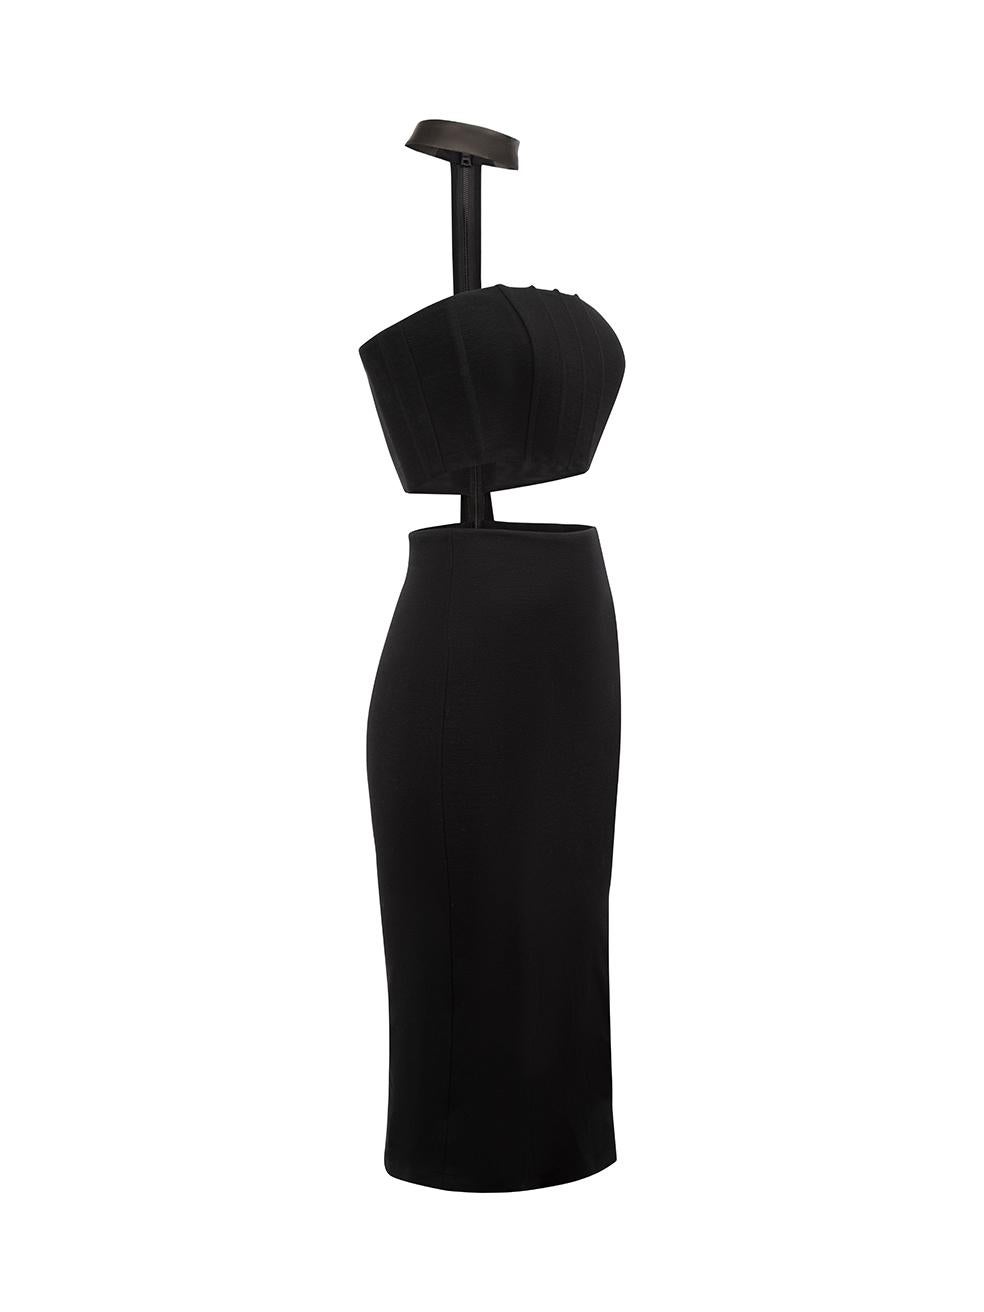 CONDITION is Very good. Hardly any visible wear on this used Alice + Olivia designer resale item.



Details


Black

Viscose

Midi cut-out dress

Figure hugging fit

Sleeveless

Leather collar

Boned cropped bodice

Side slit on the skirt

Back zip